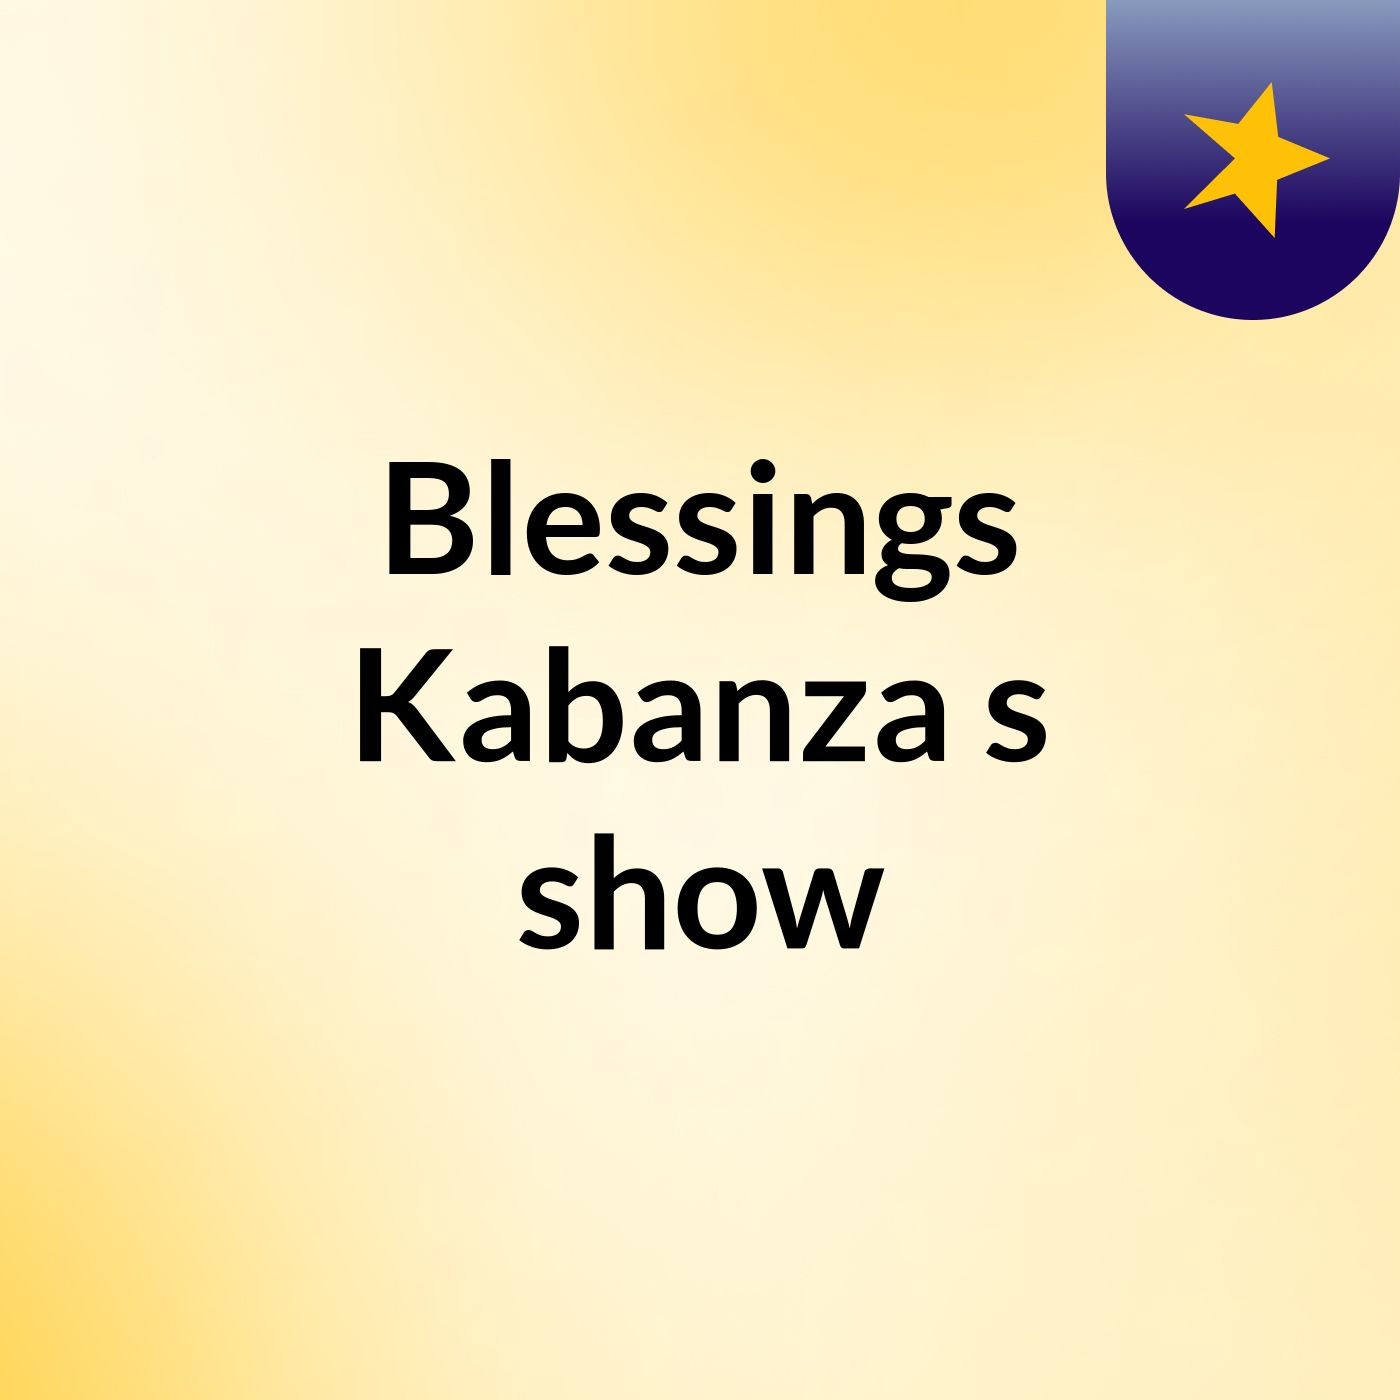 Blessings Kabanza's show